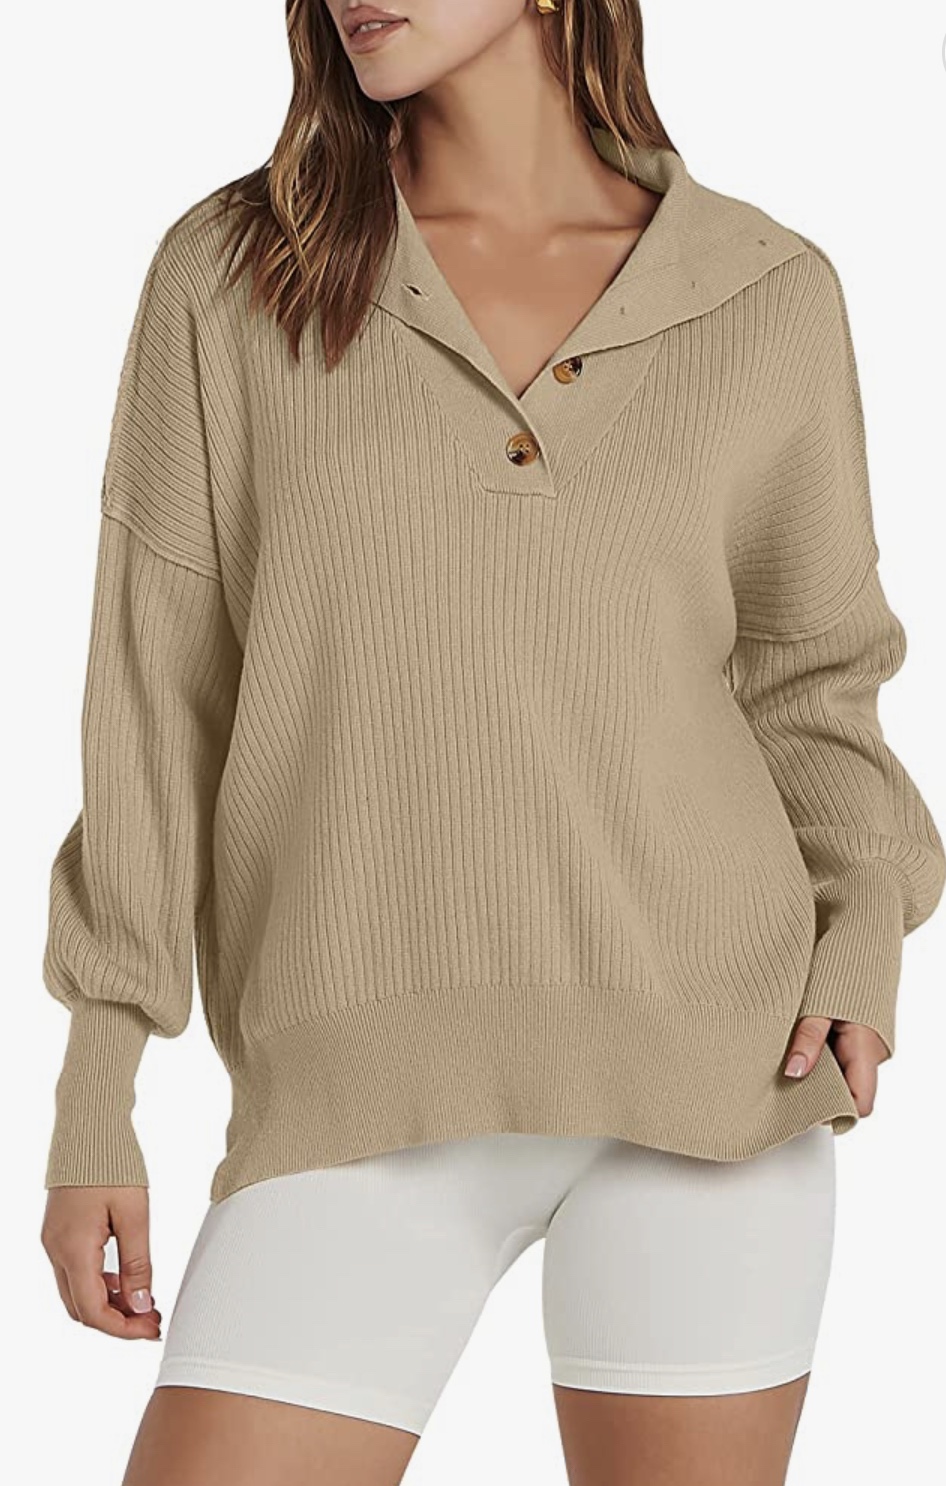 Now $14.80! Women’s Knit Pullover Sweater (Was $36.99)